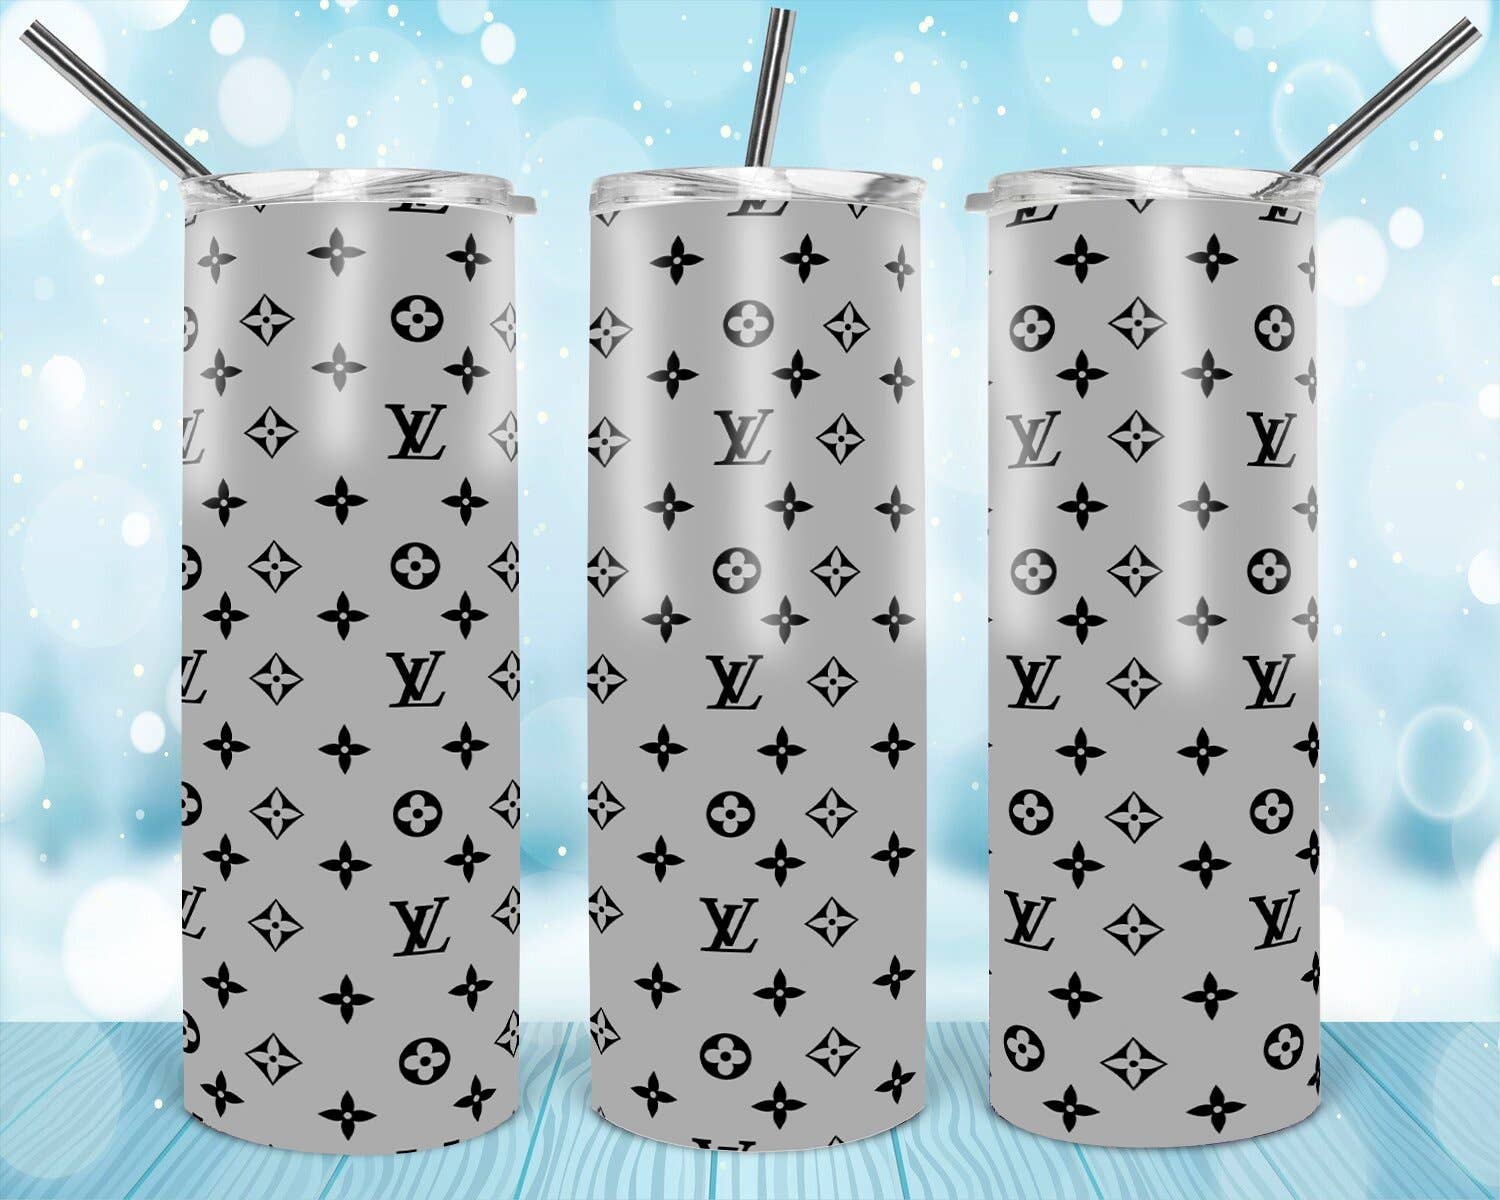 lv tumblers with lids and straws